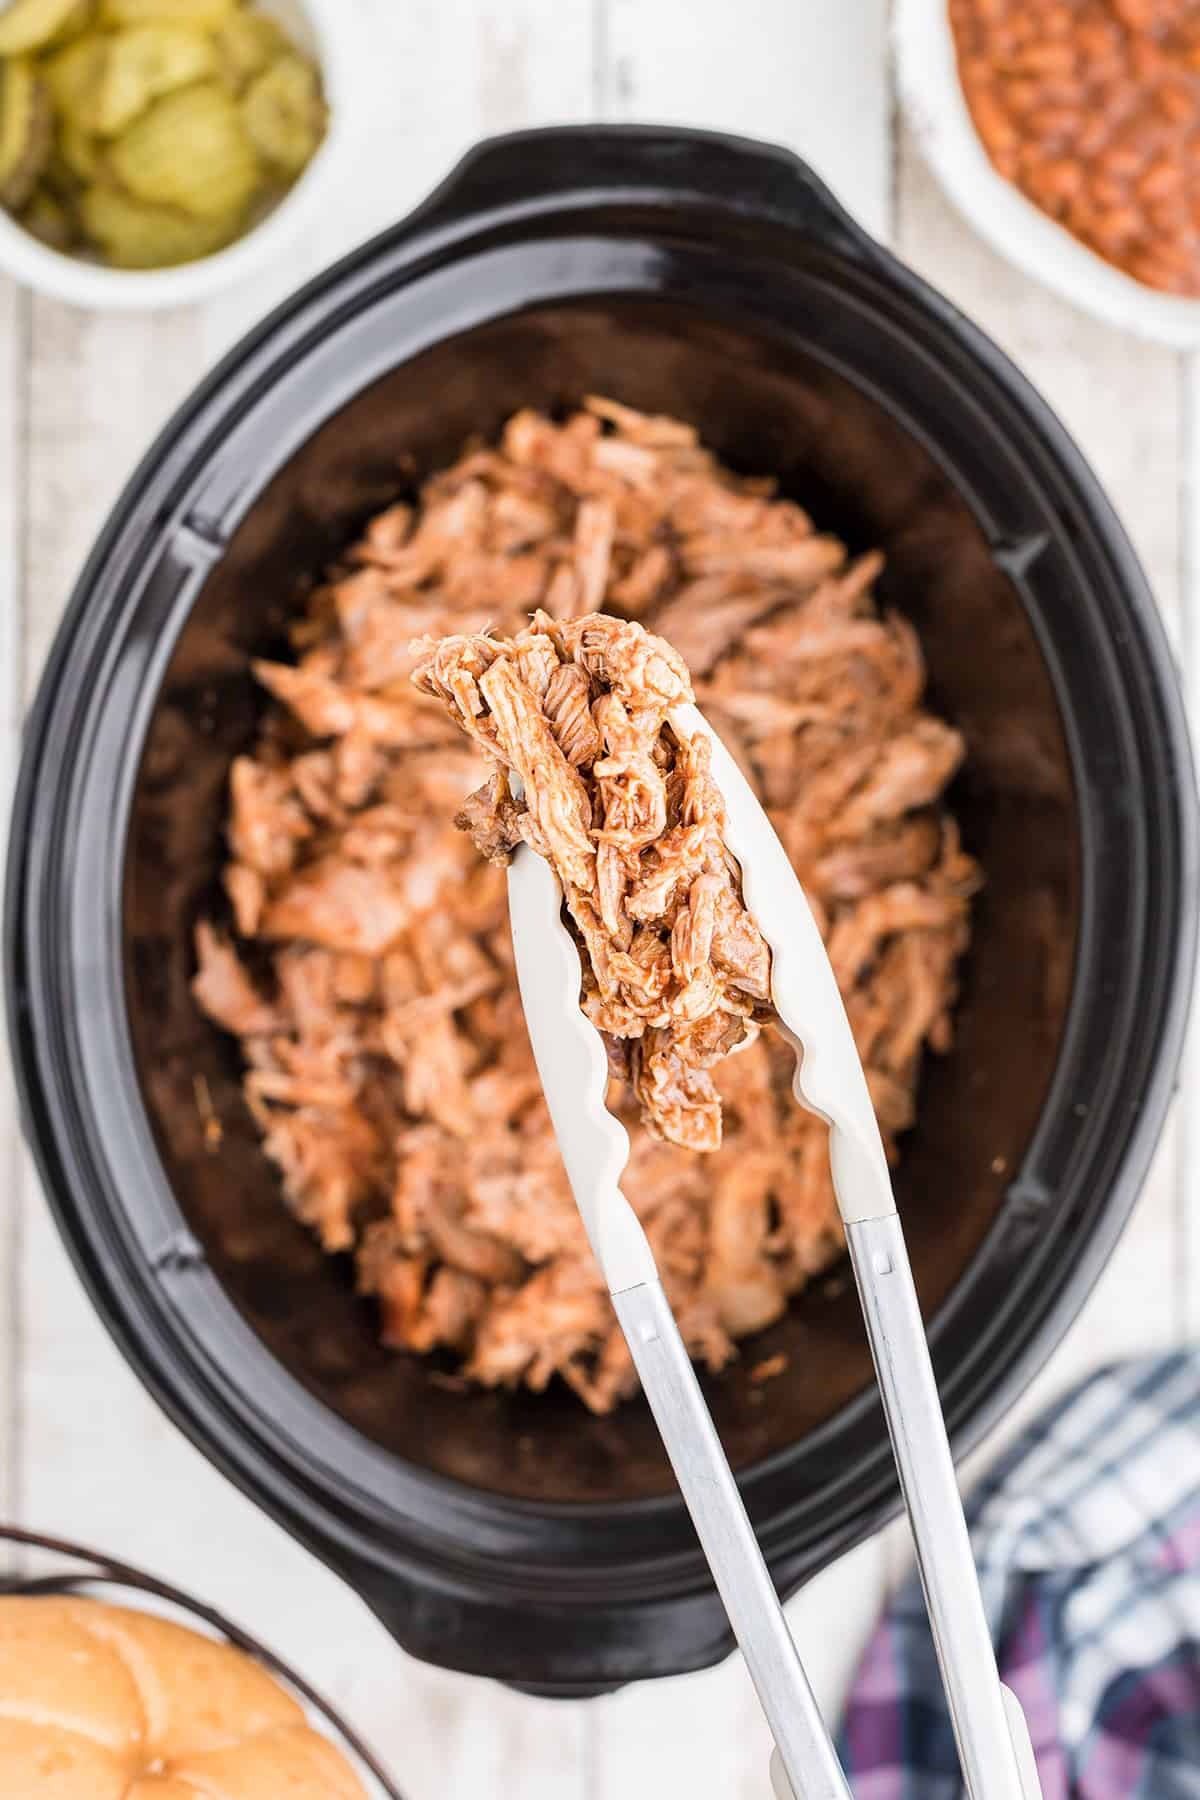 Tongs holding a portion of pulled pork above a slow cooker.